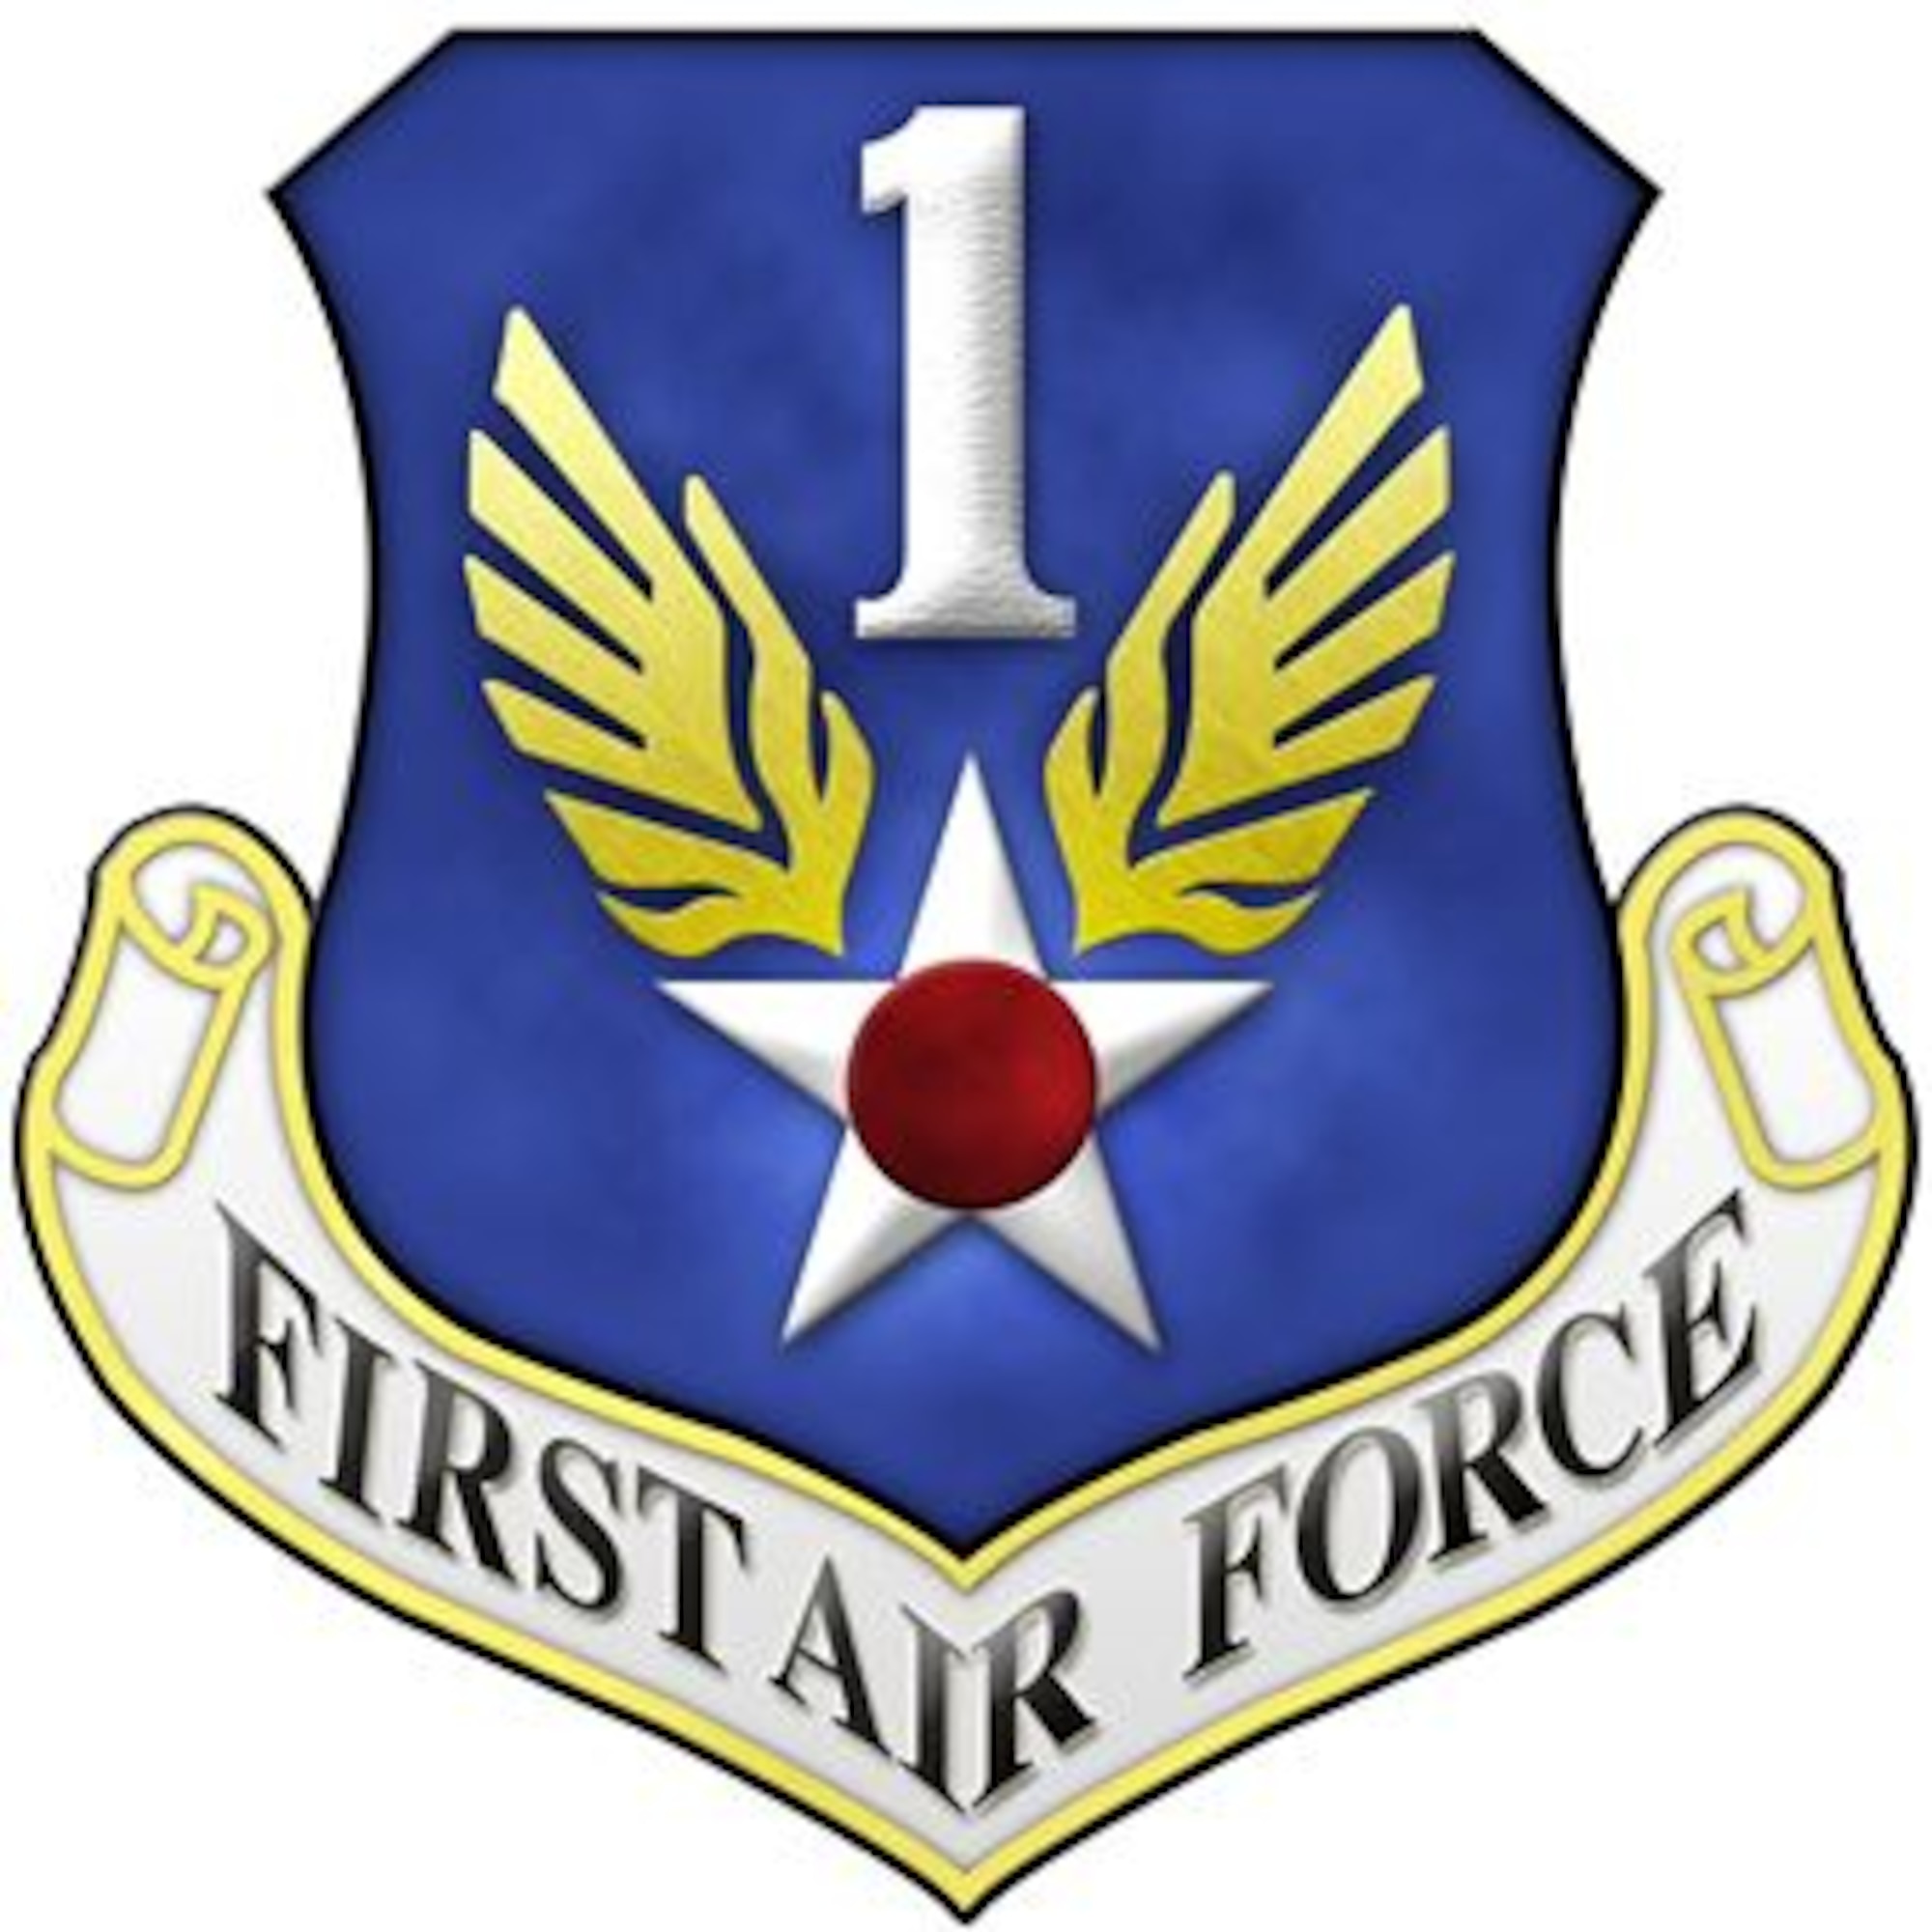 The patch of First Air Force.